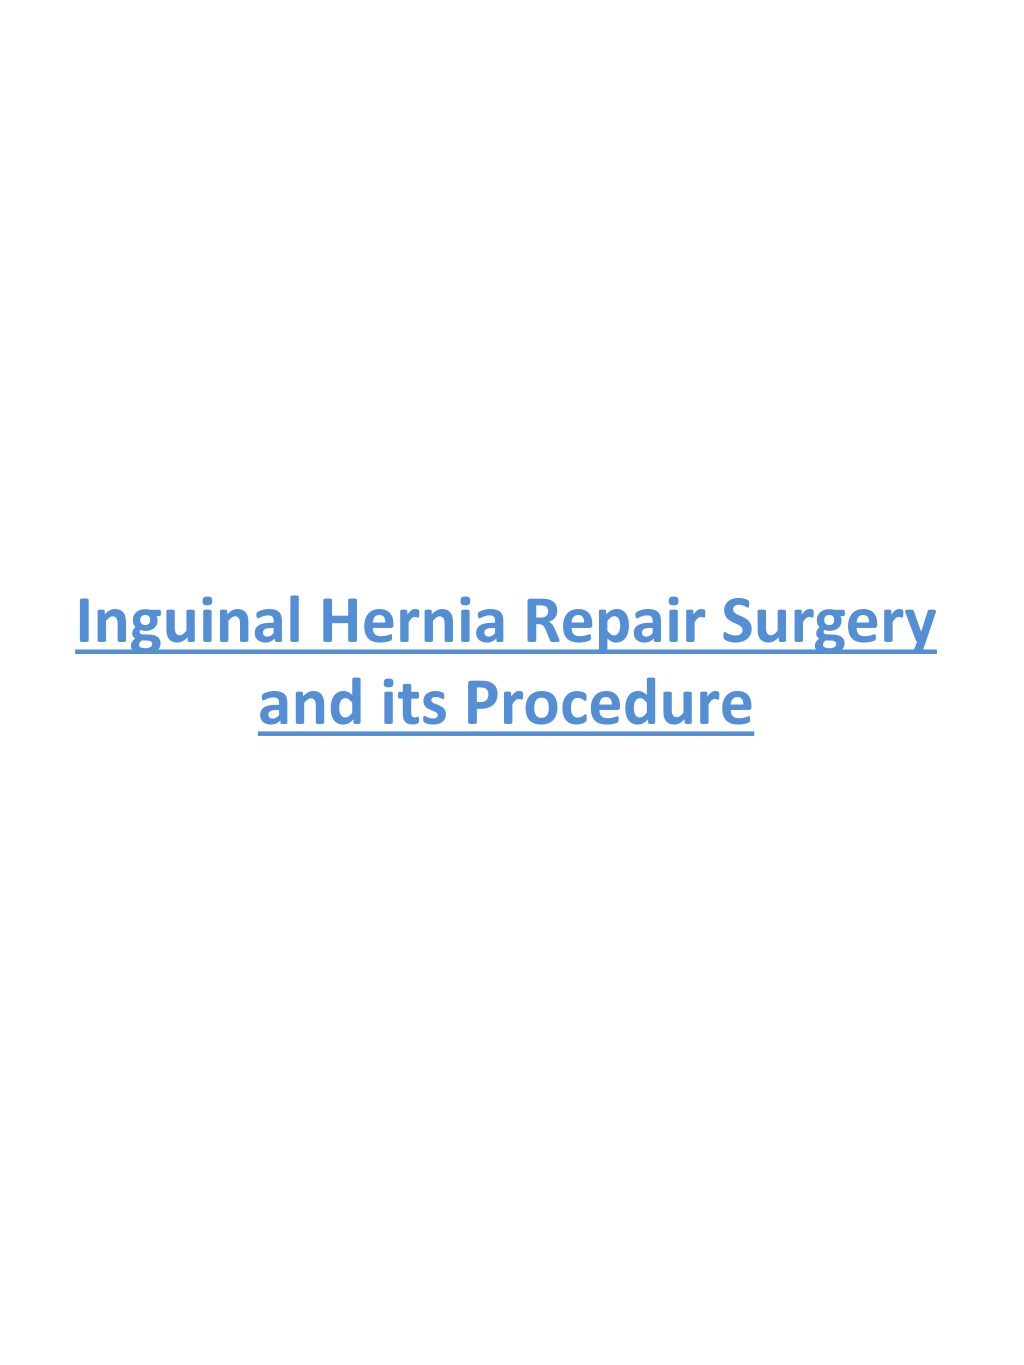 Ppt Inguinal Hernia Repair Surgery And Its Procedure Powerpoint